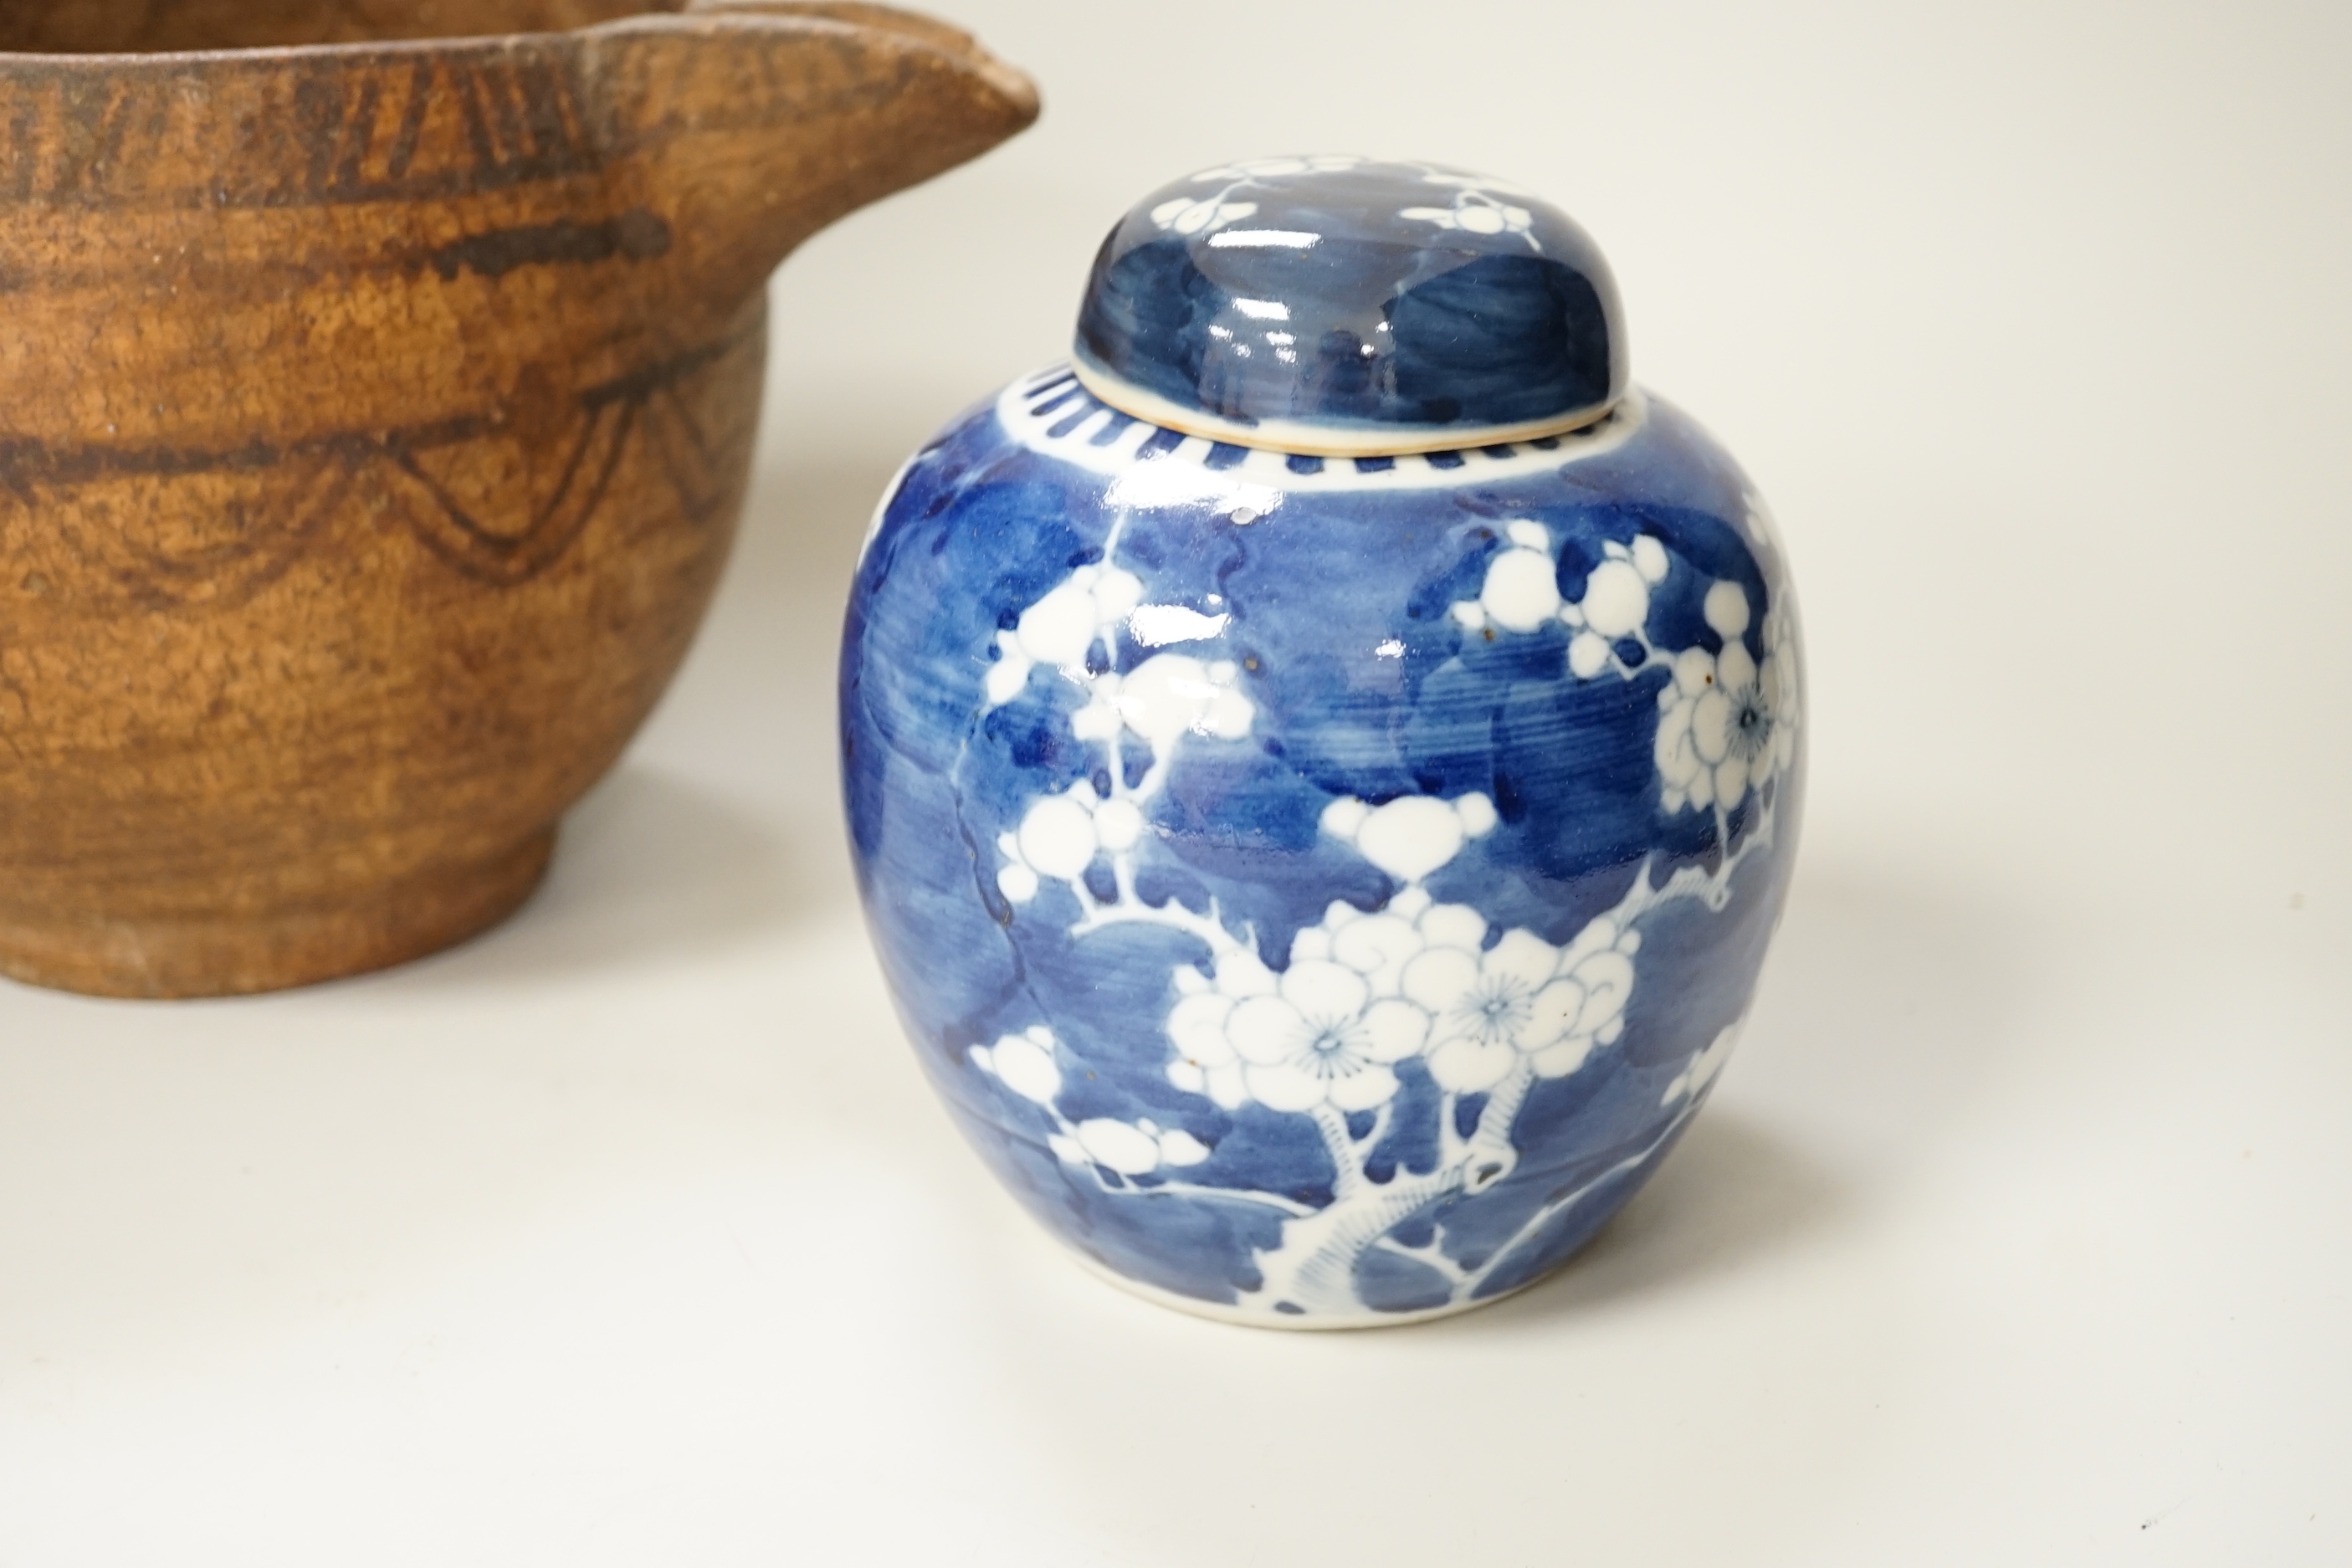 A Chinese blue and white prunus jar and cover, a Japanese Satsuma pottery bowl and a Moroccan terracotta jug, 20cm tall